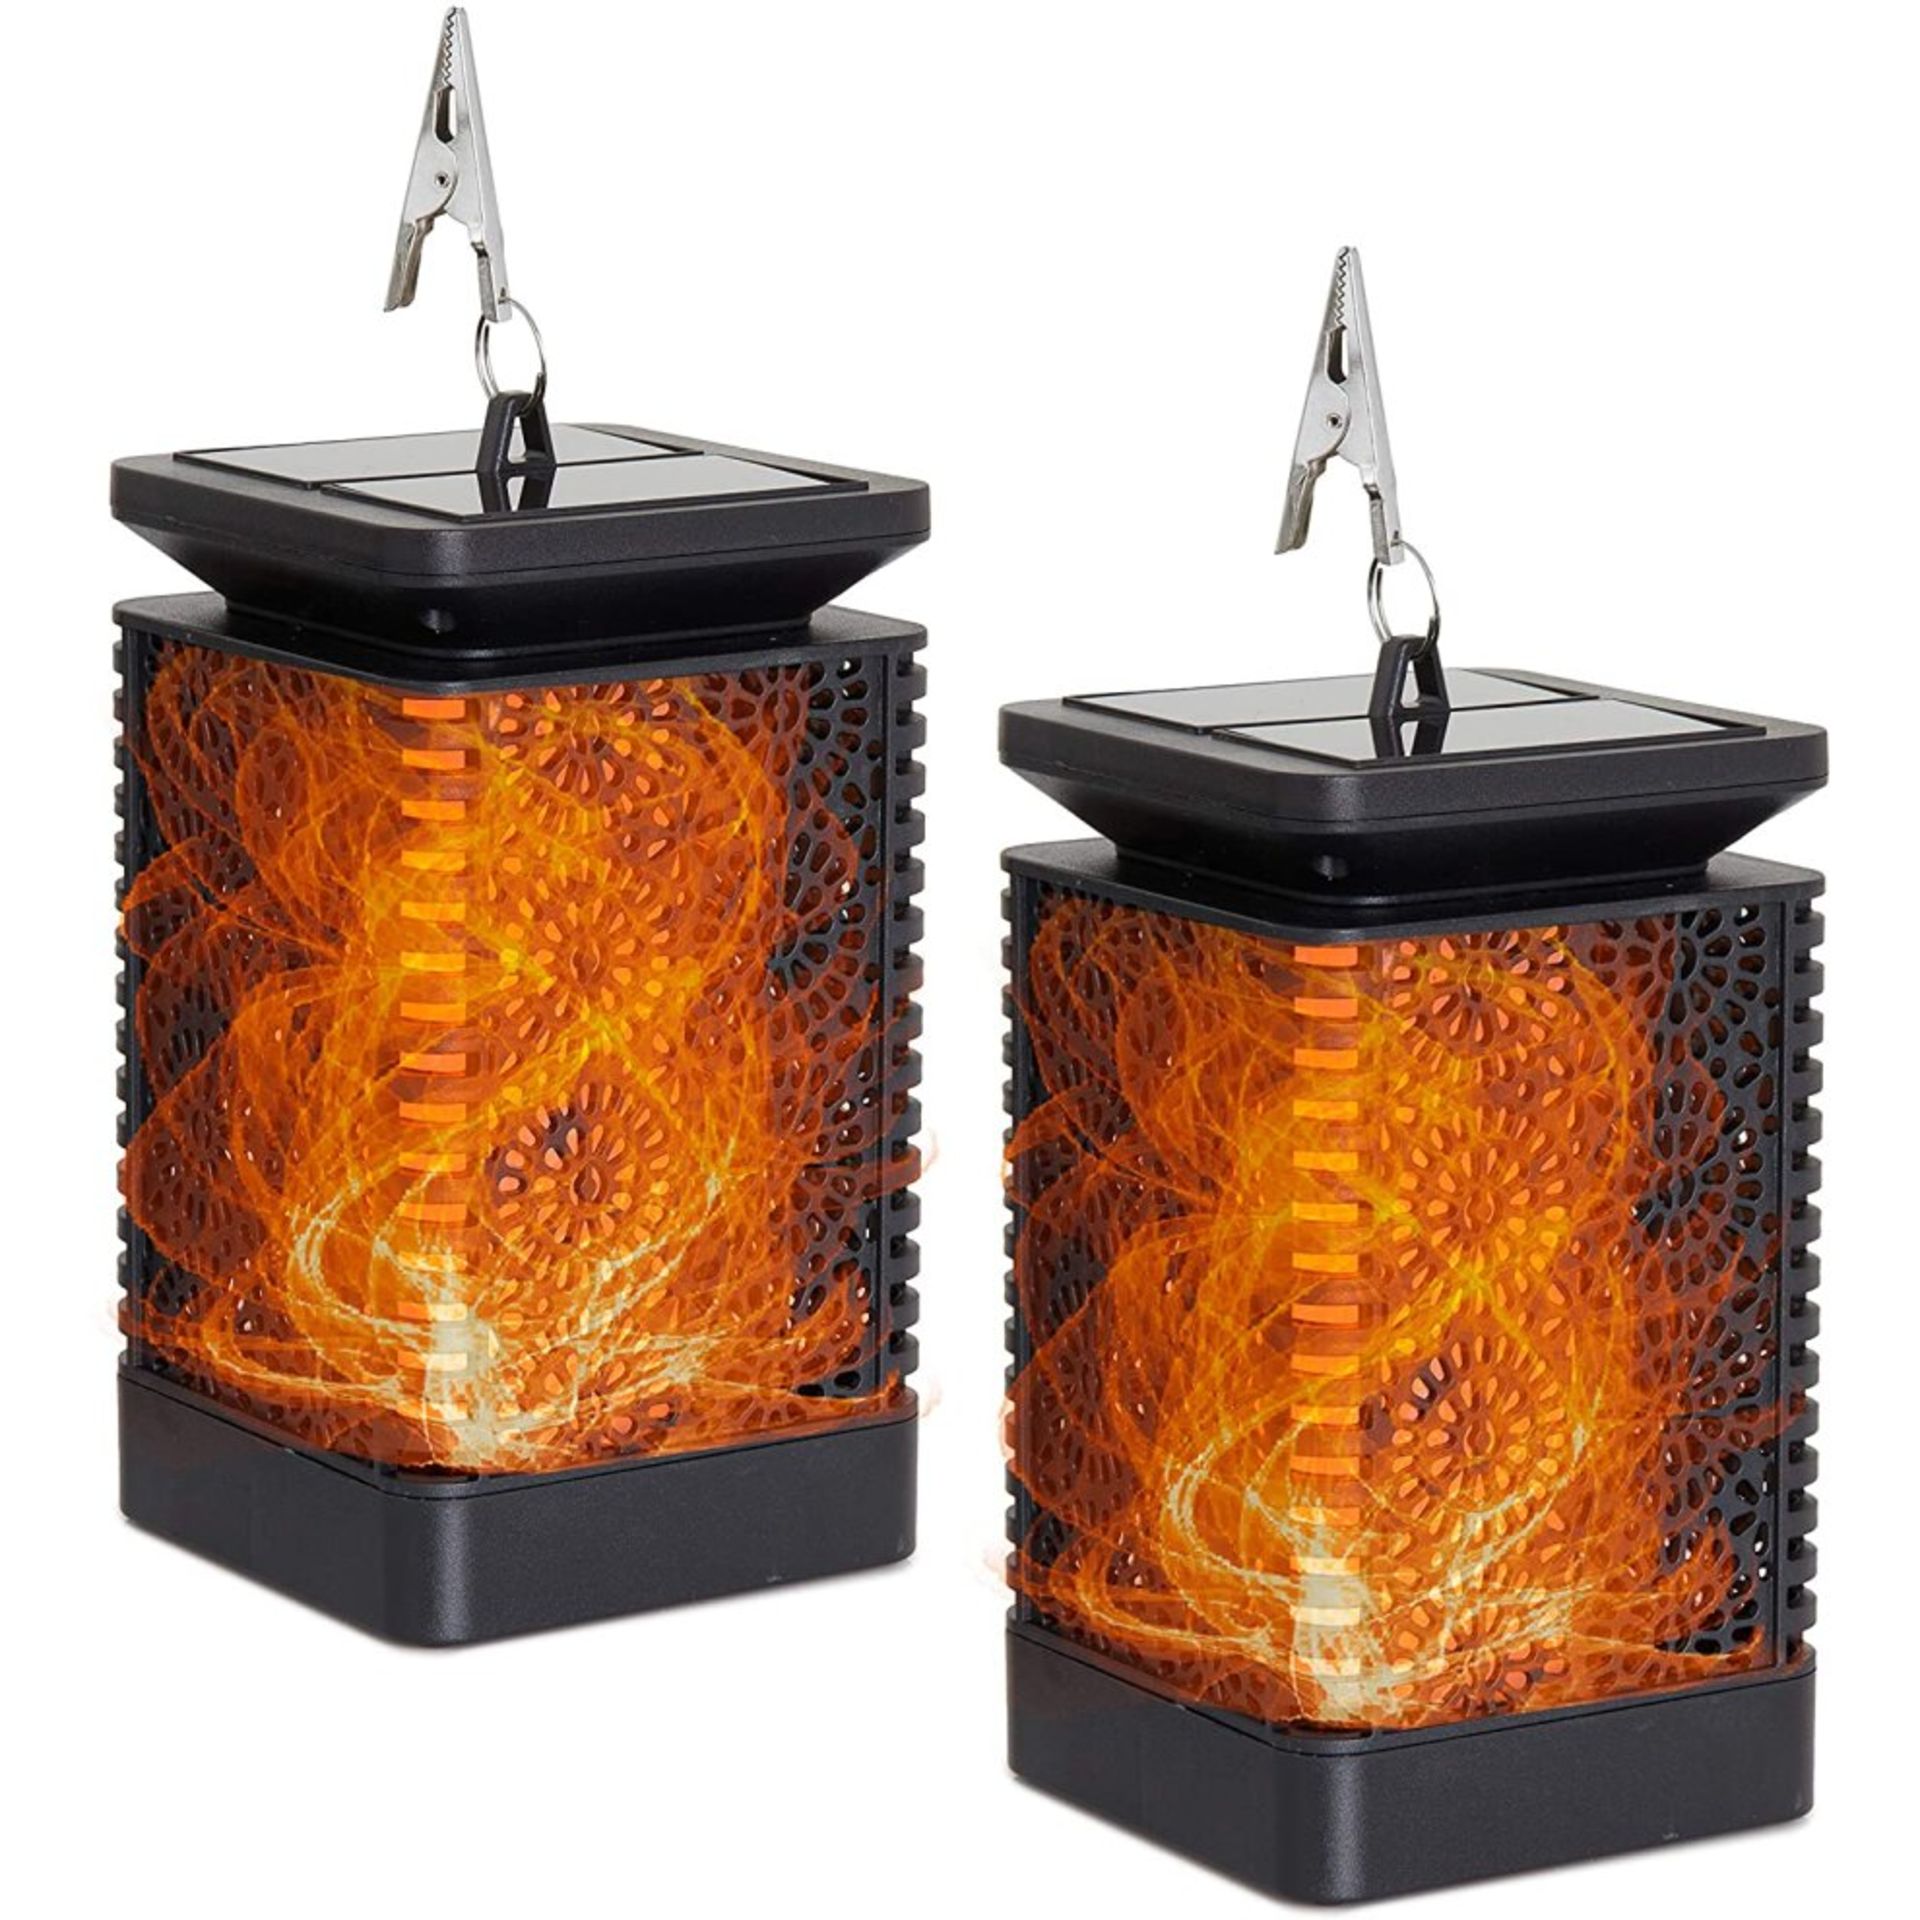 Decoexpress LED 2 x Solar Flame Effect Table Lamps RRP £39.95